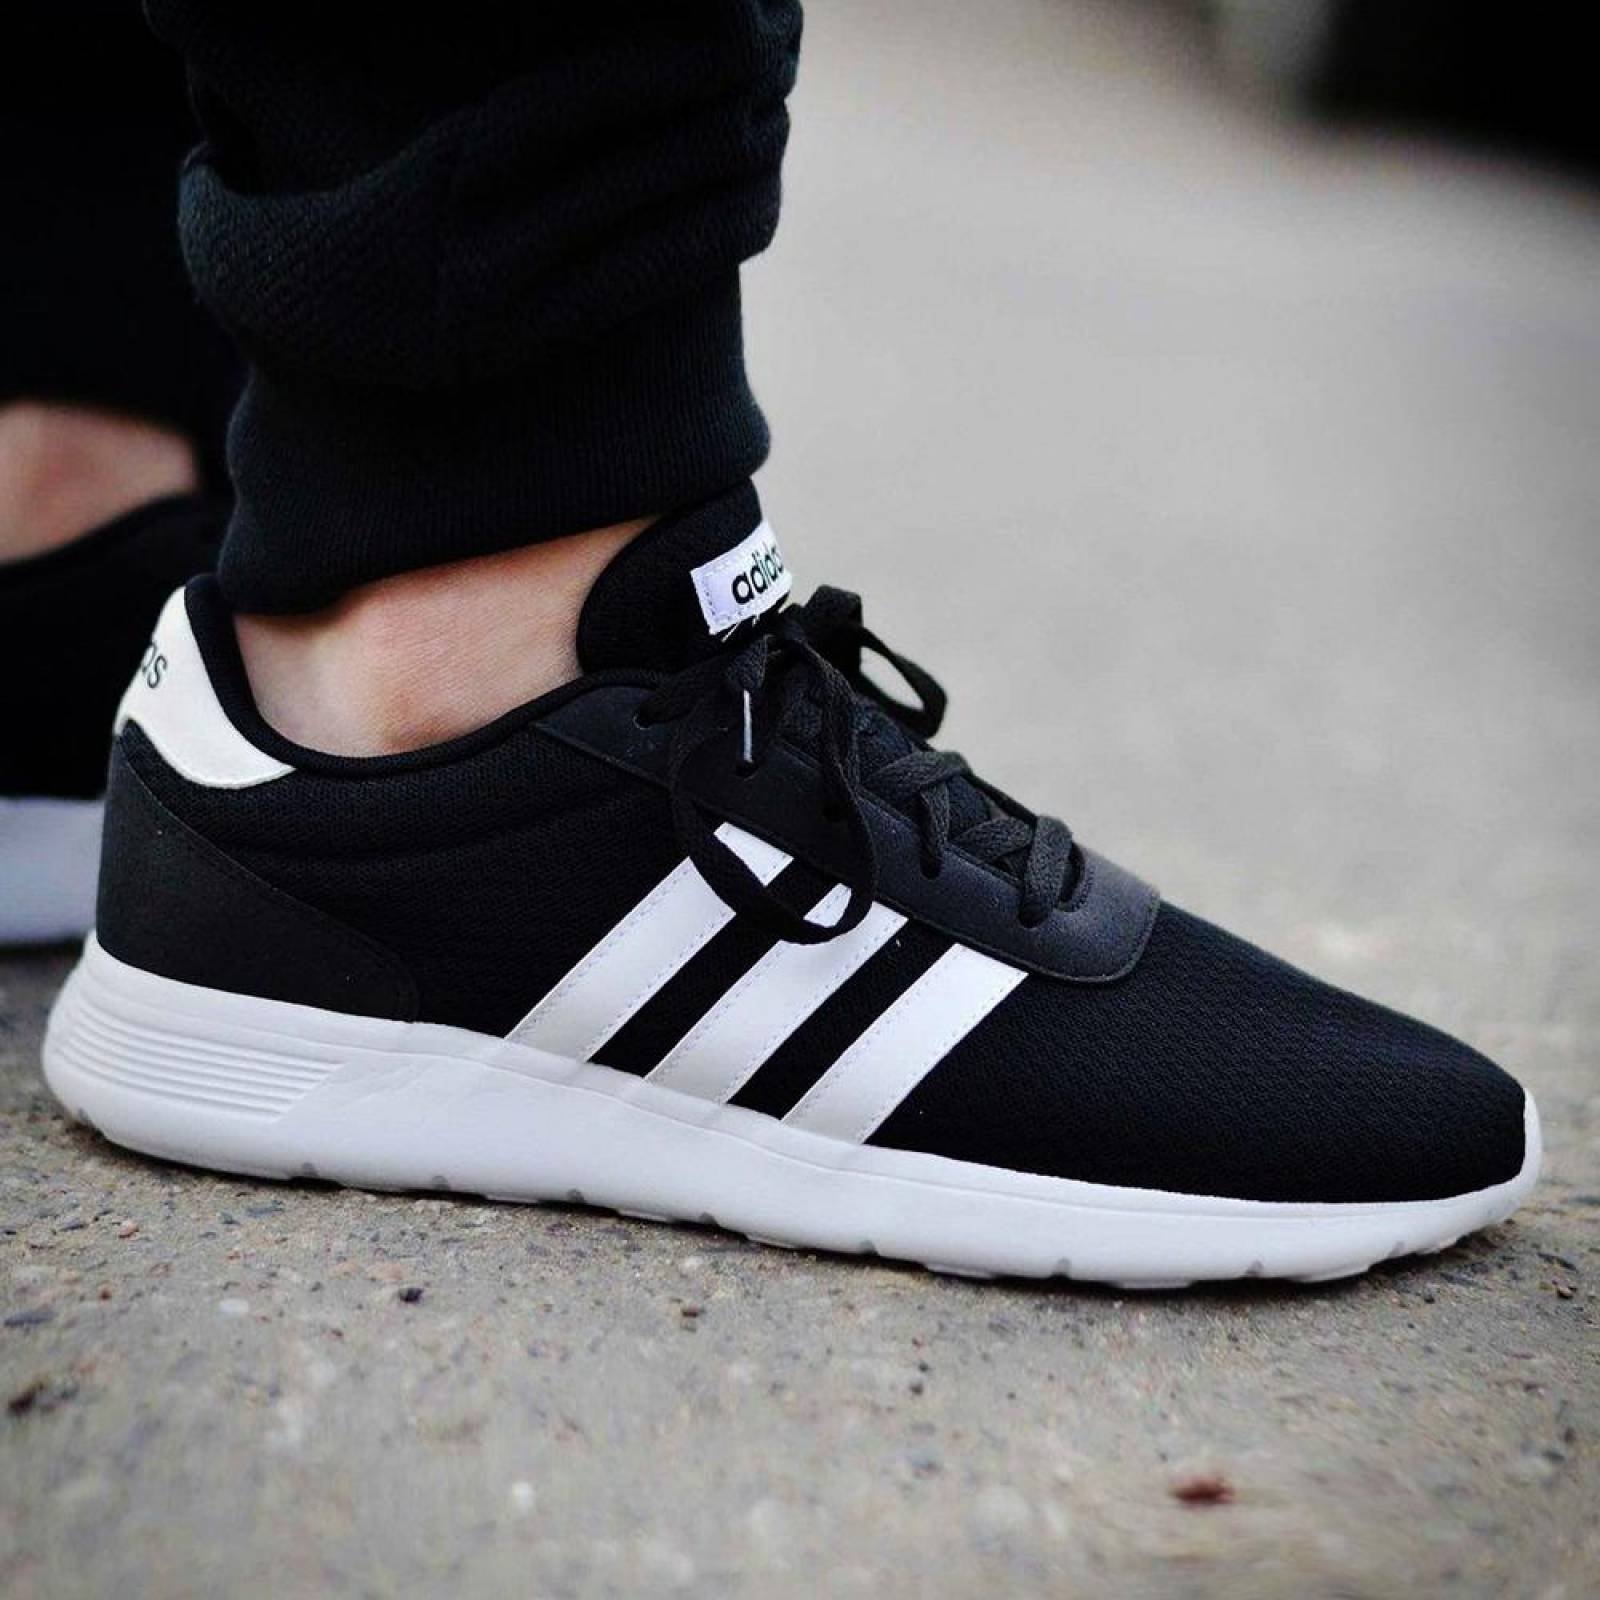 adidas lite racer outfit